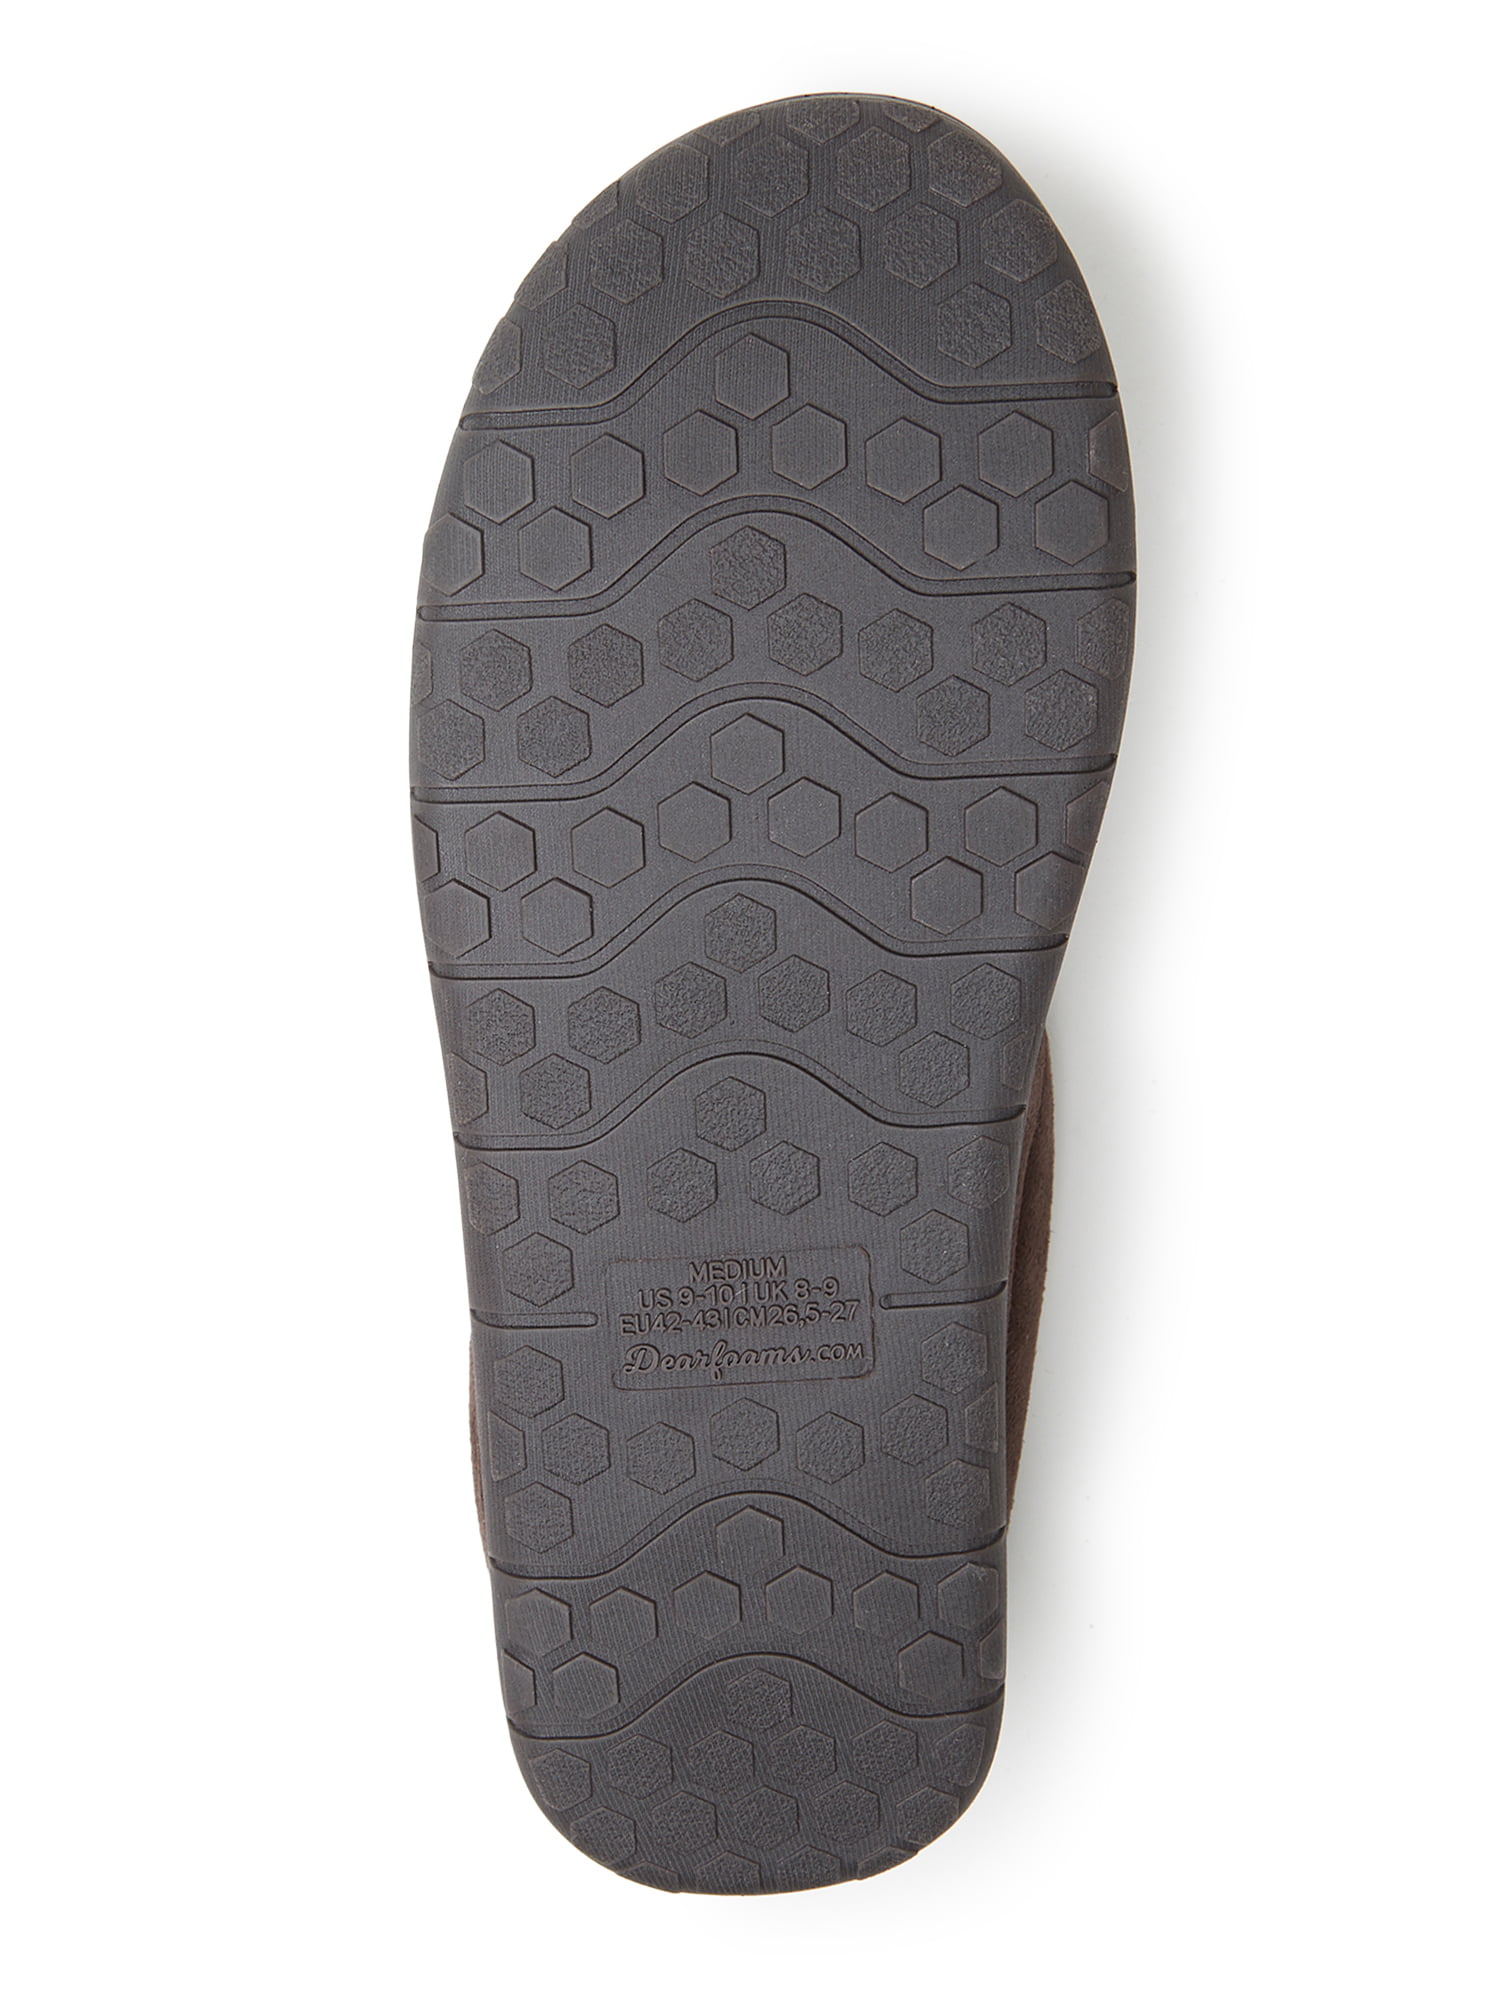 men's dearfoams perforated microsuede clog slippers